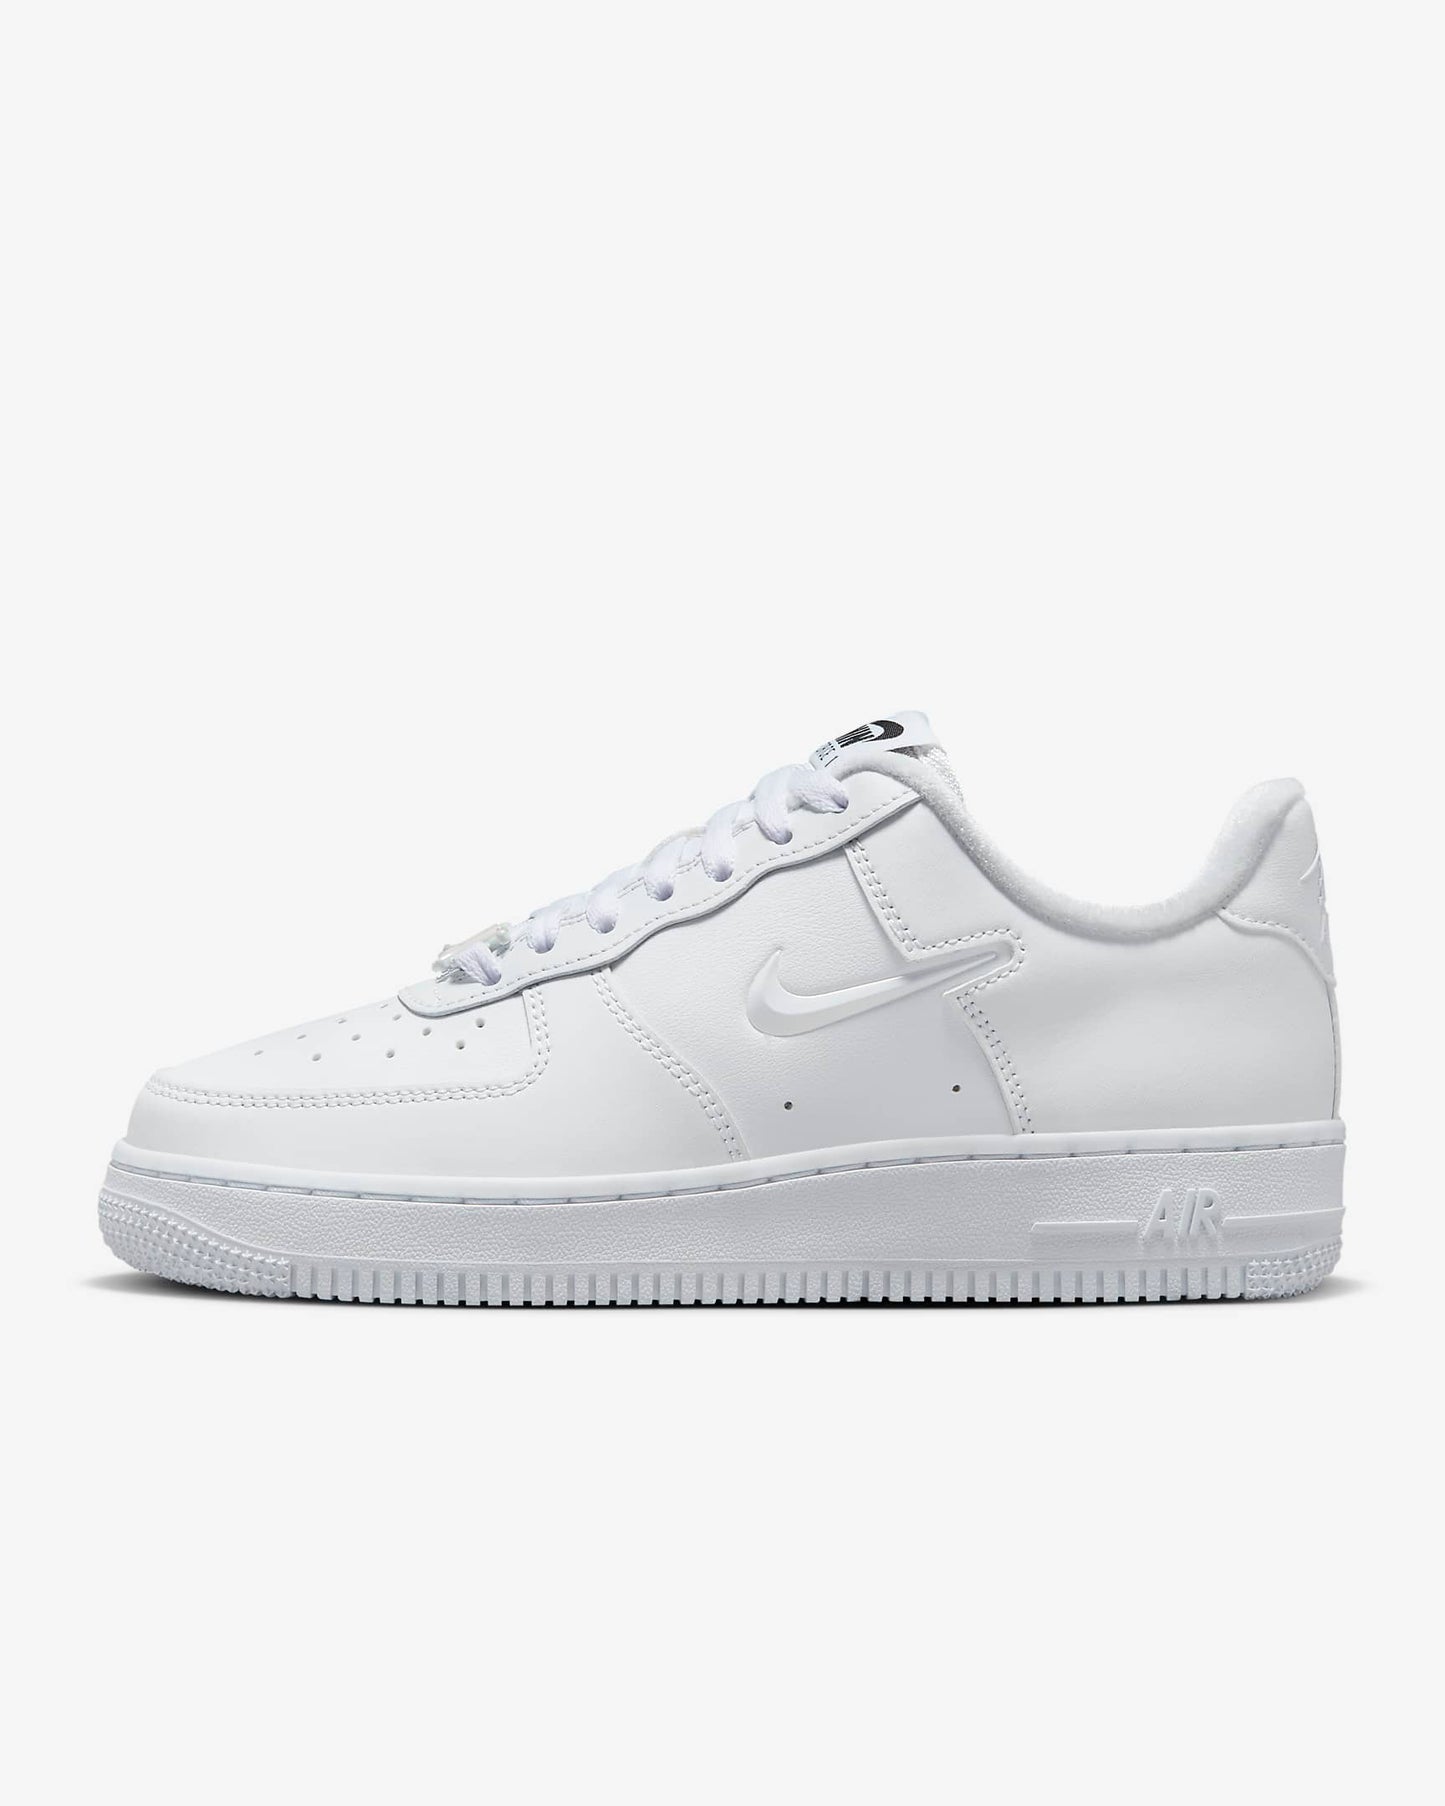 Nike Air Force 1 '07 Women's Shoes, White/Black/Multi-Color